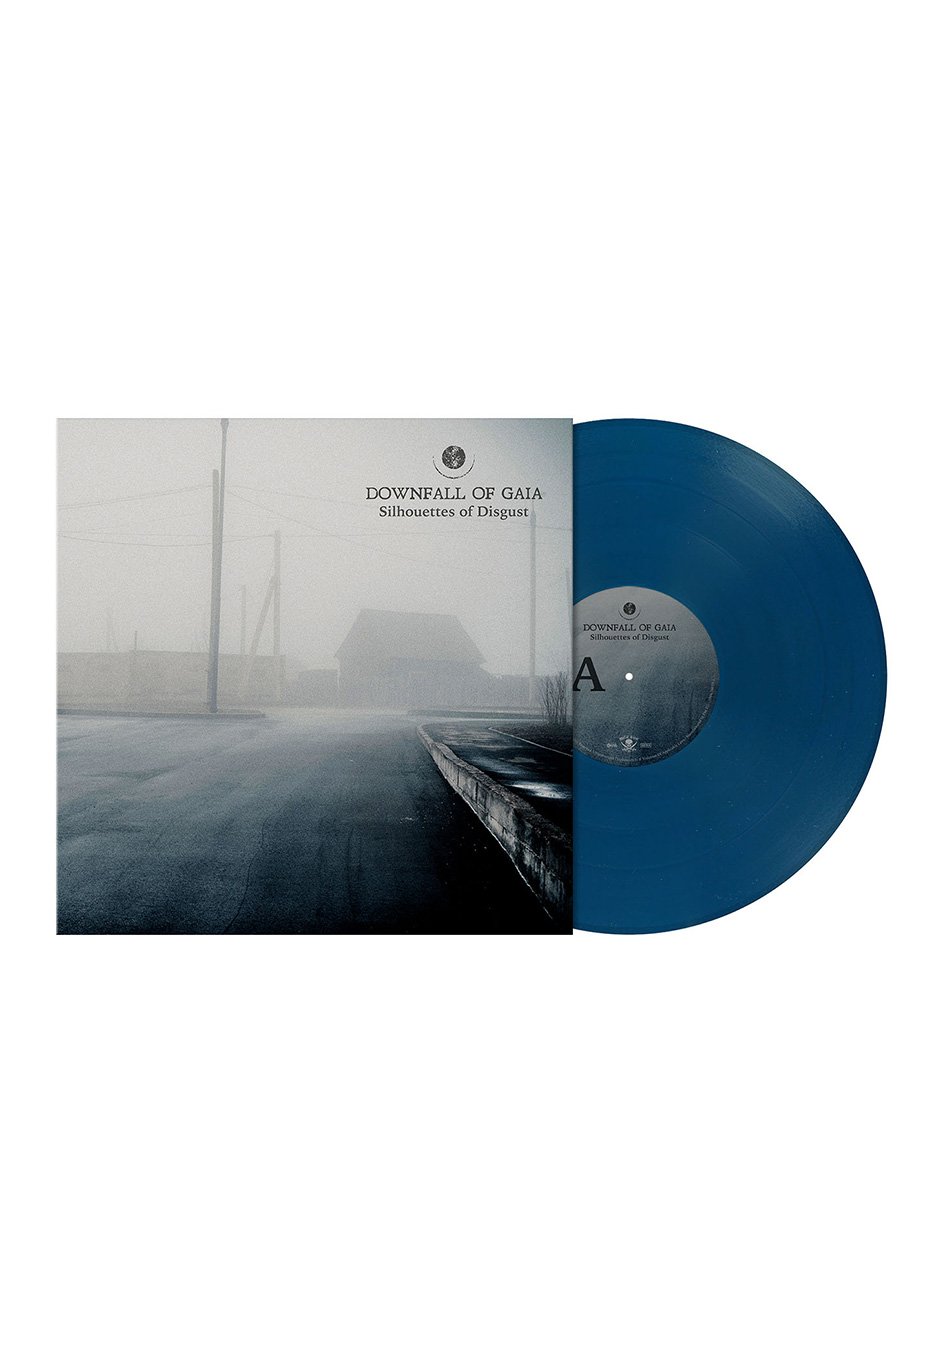 Downfall Of Gaia - Silhouettes Of Disgust Ltd. Blue Green - Marbled Vinyl